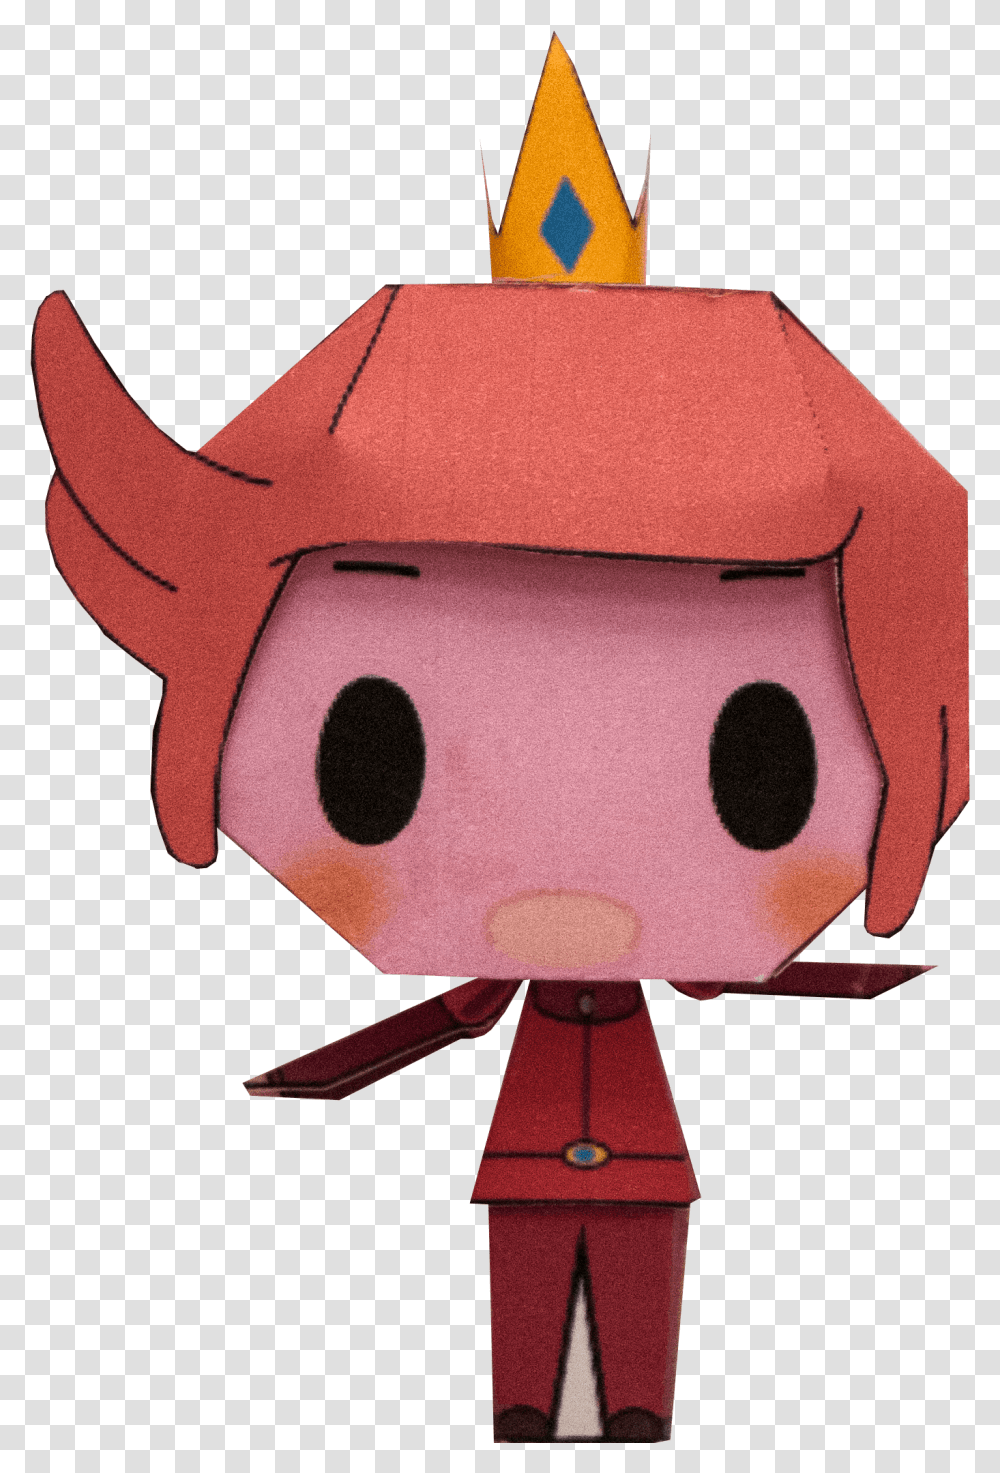 Prince Gumball Chibi Doll From Adventure Time Dolls Chibi Papercraft Gumball, Plush, Toy, Cross Transparent Png